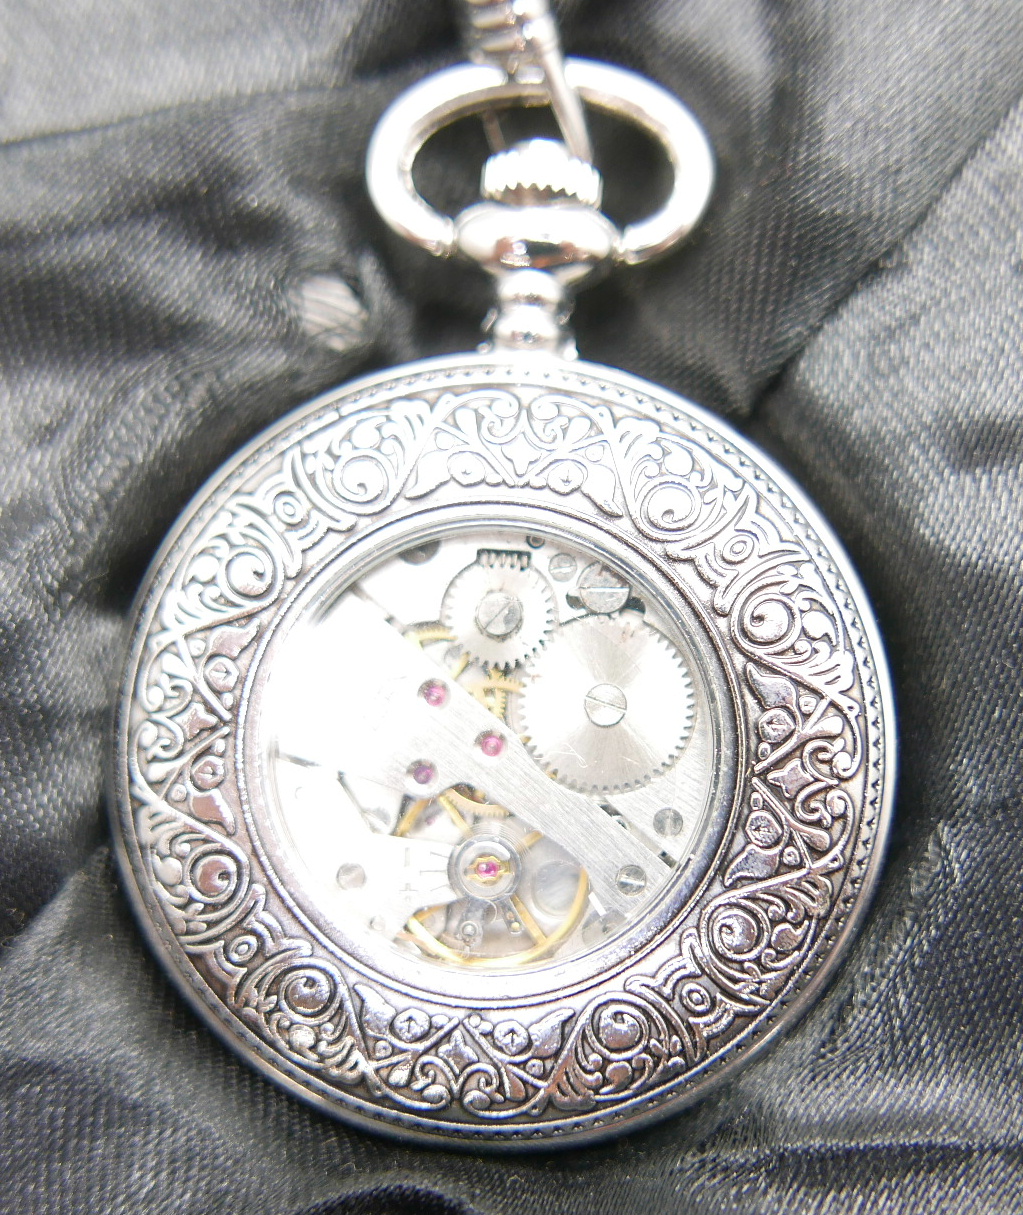 Thirty-five Atlas pocket watches including Heritage, Stobart, Glory of Steam and display case - Image 10 of 10